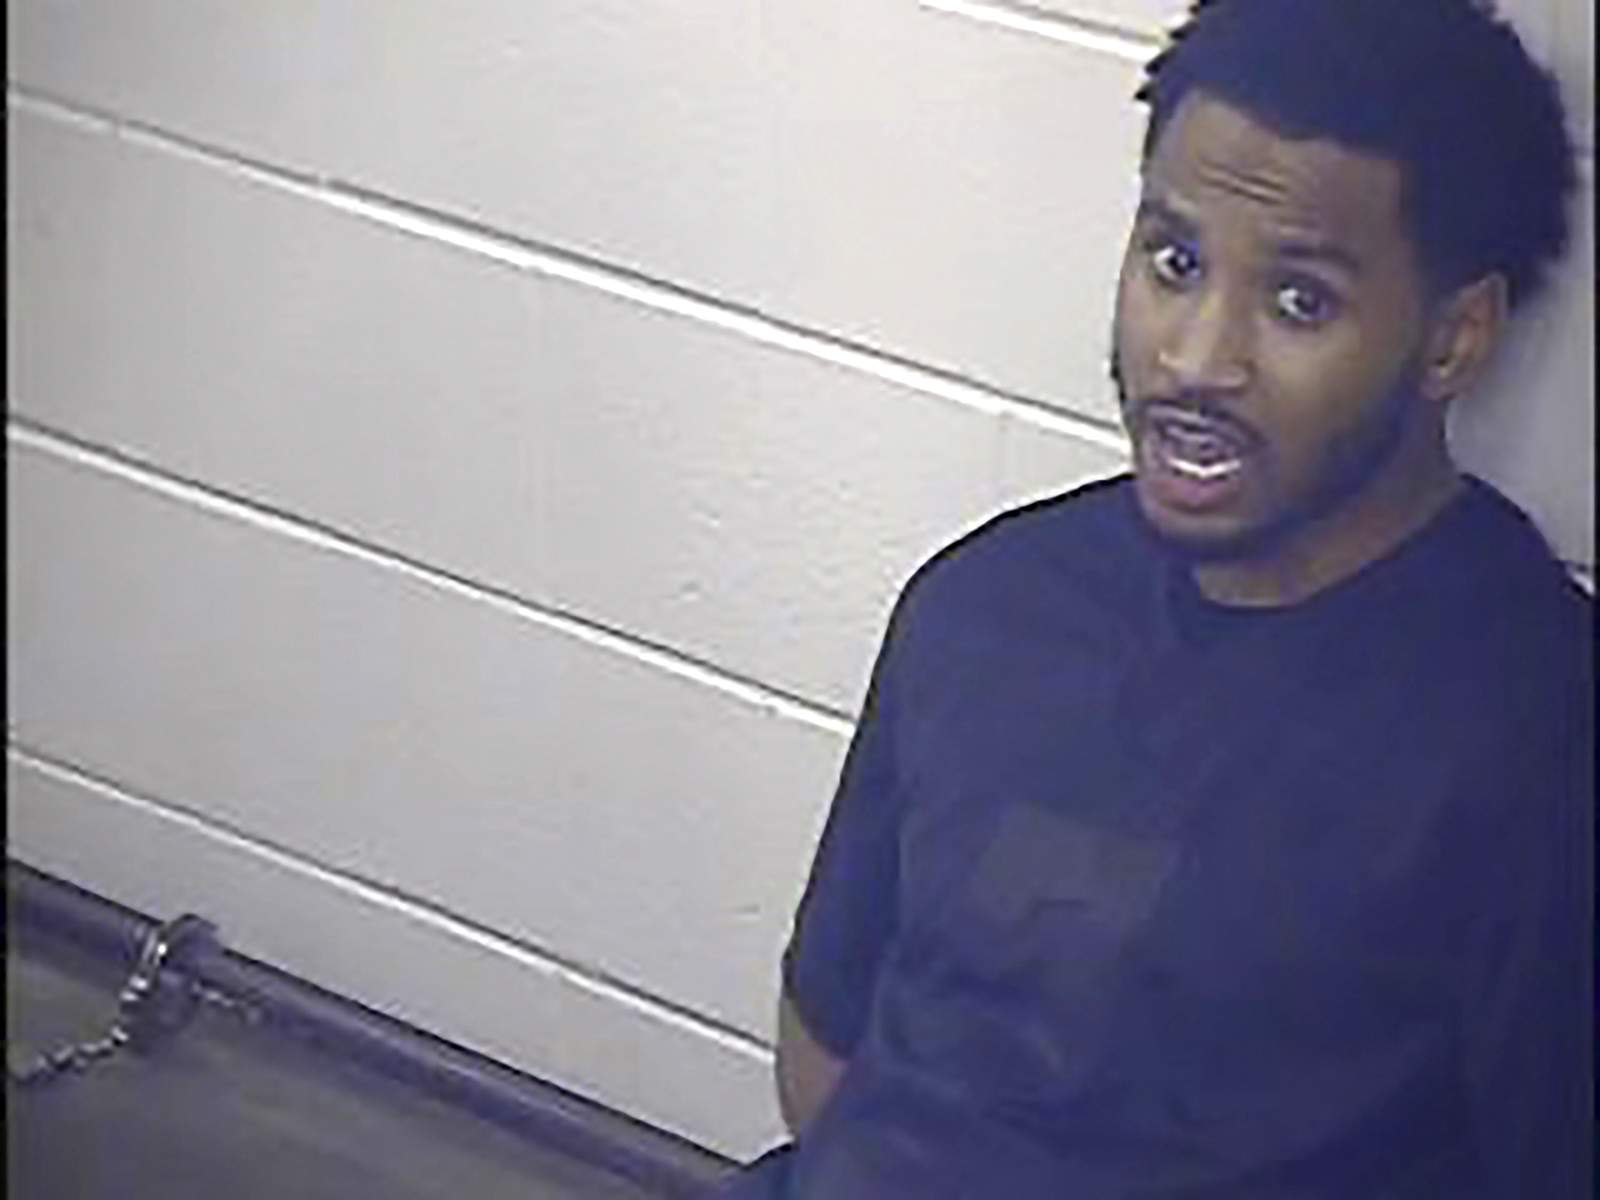 R&B artist Trey Songz arrested at AFC Championship game